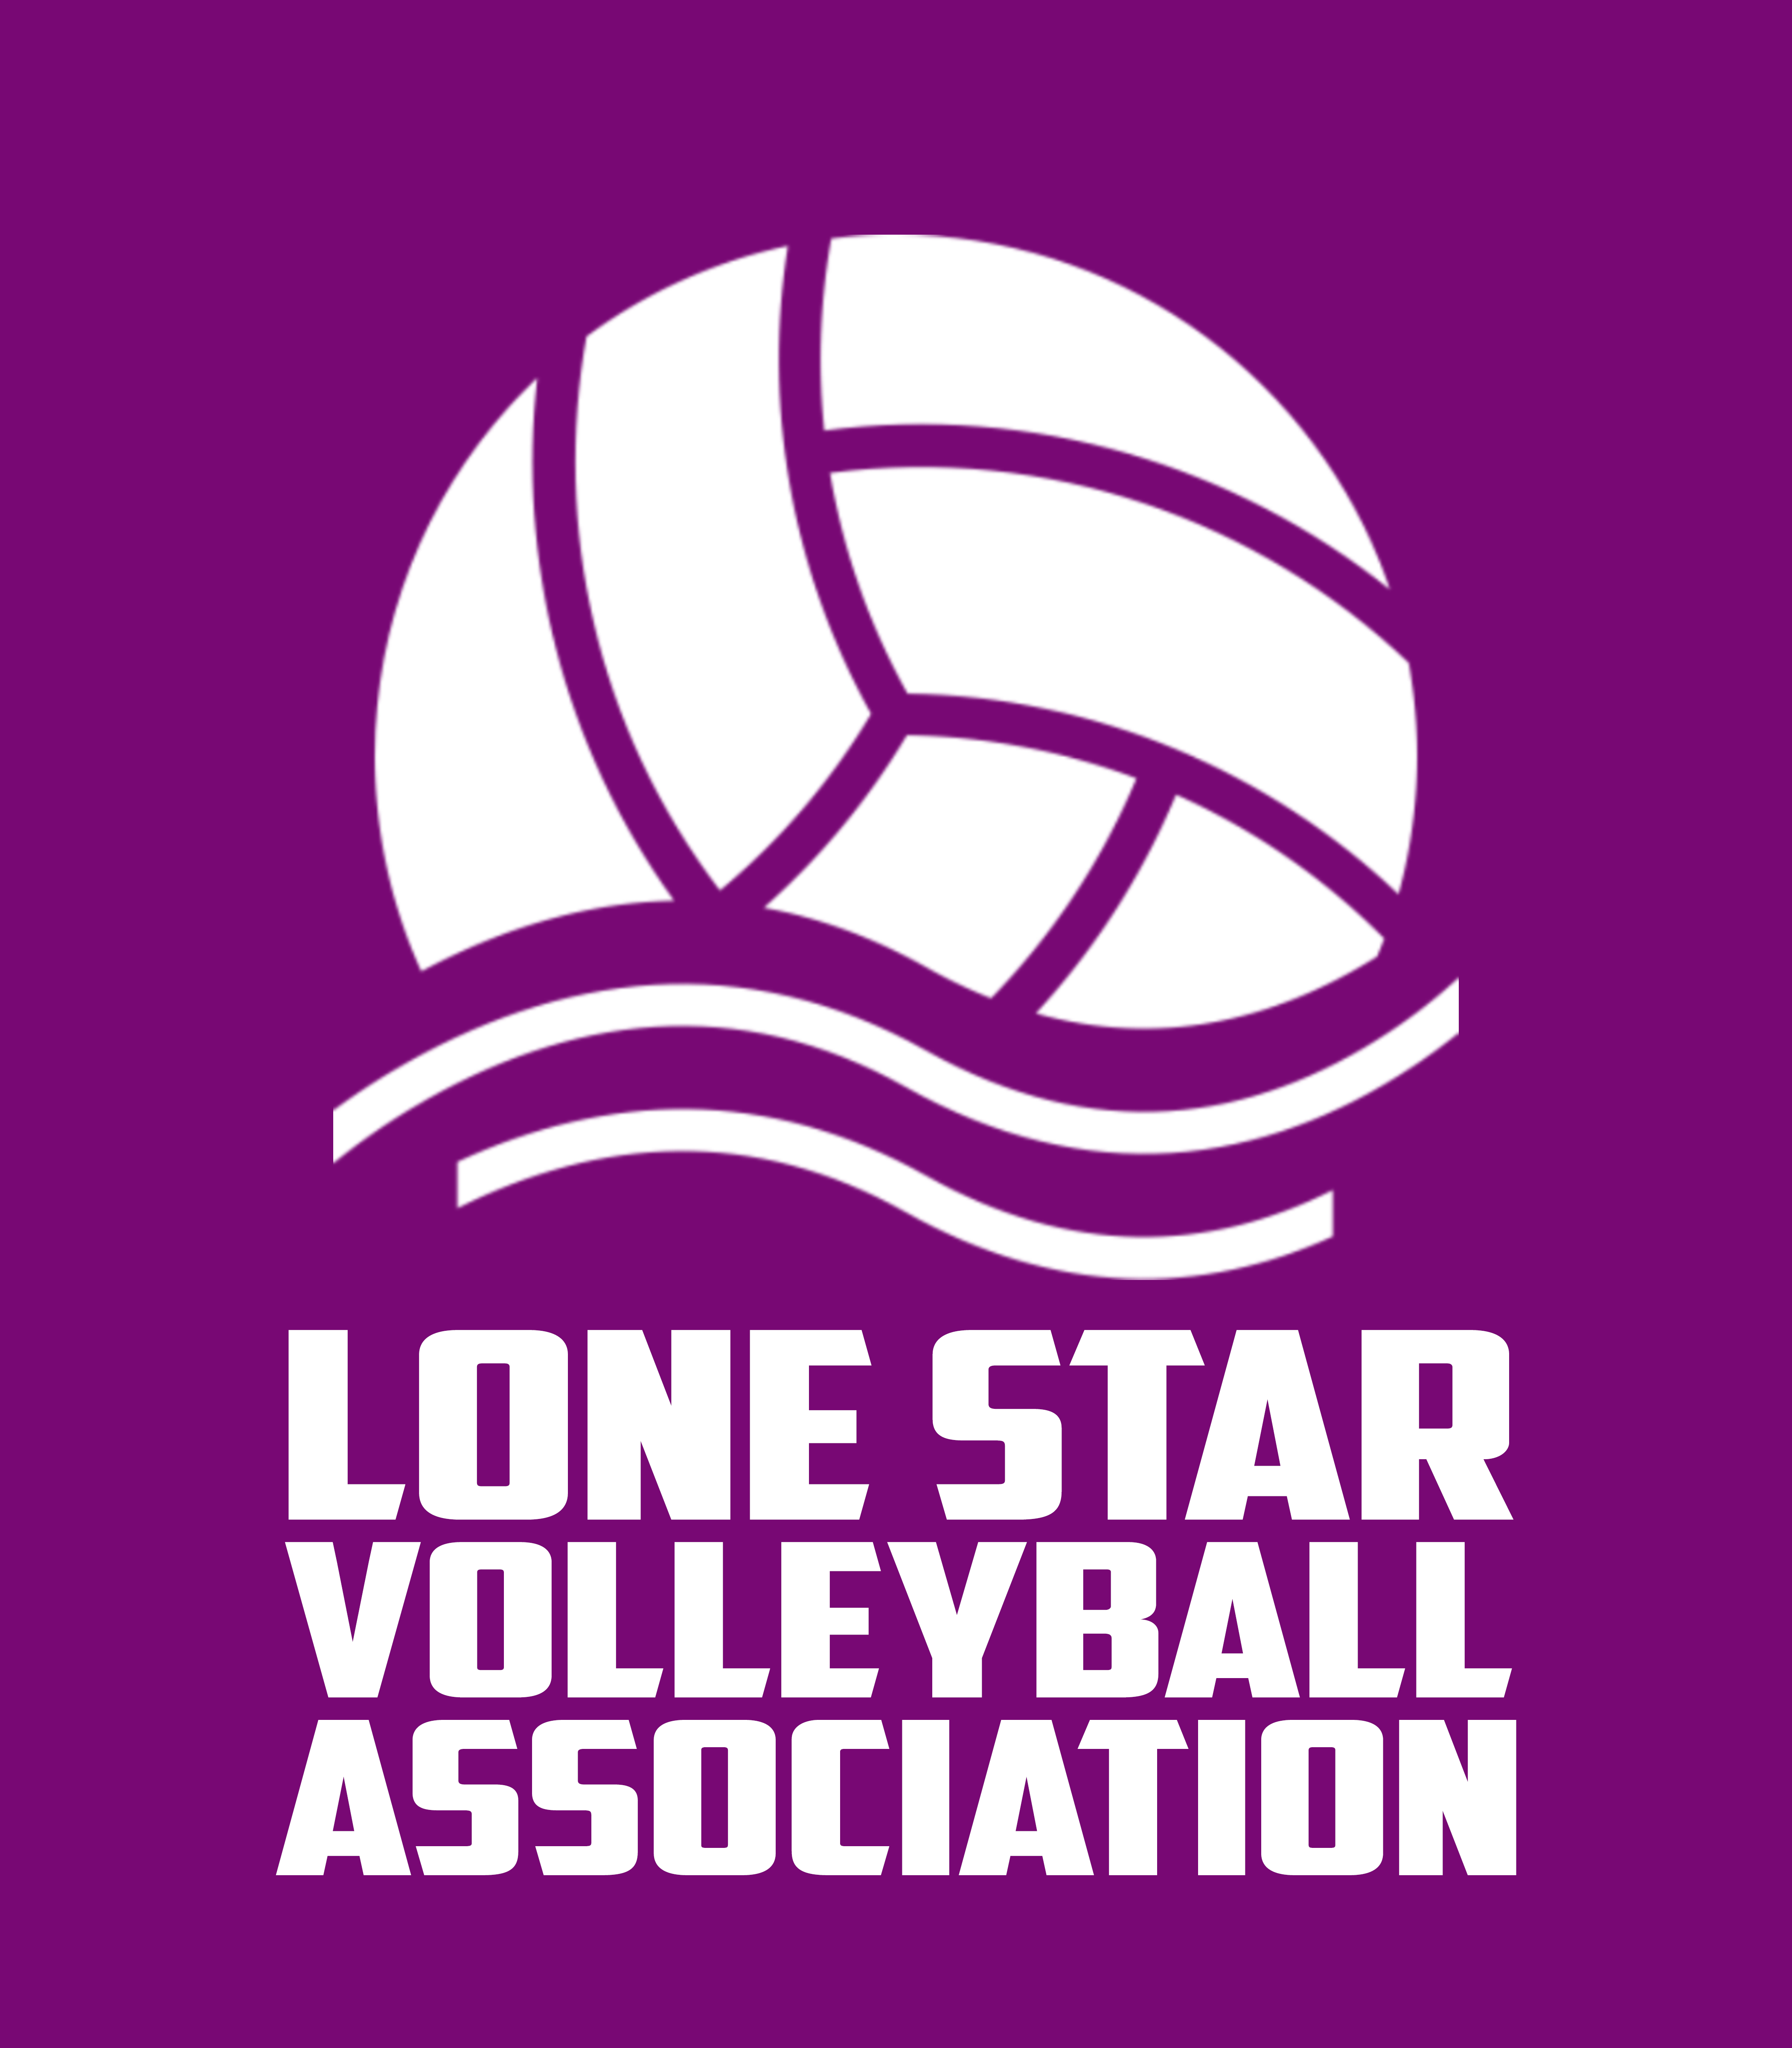 Lone Star Volleyball Association Online store product